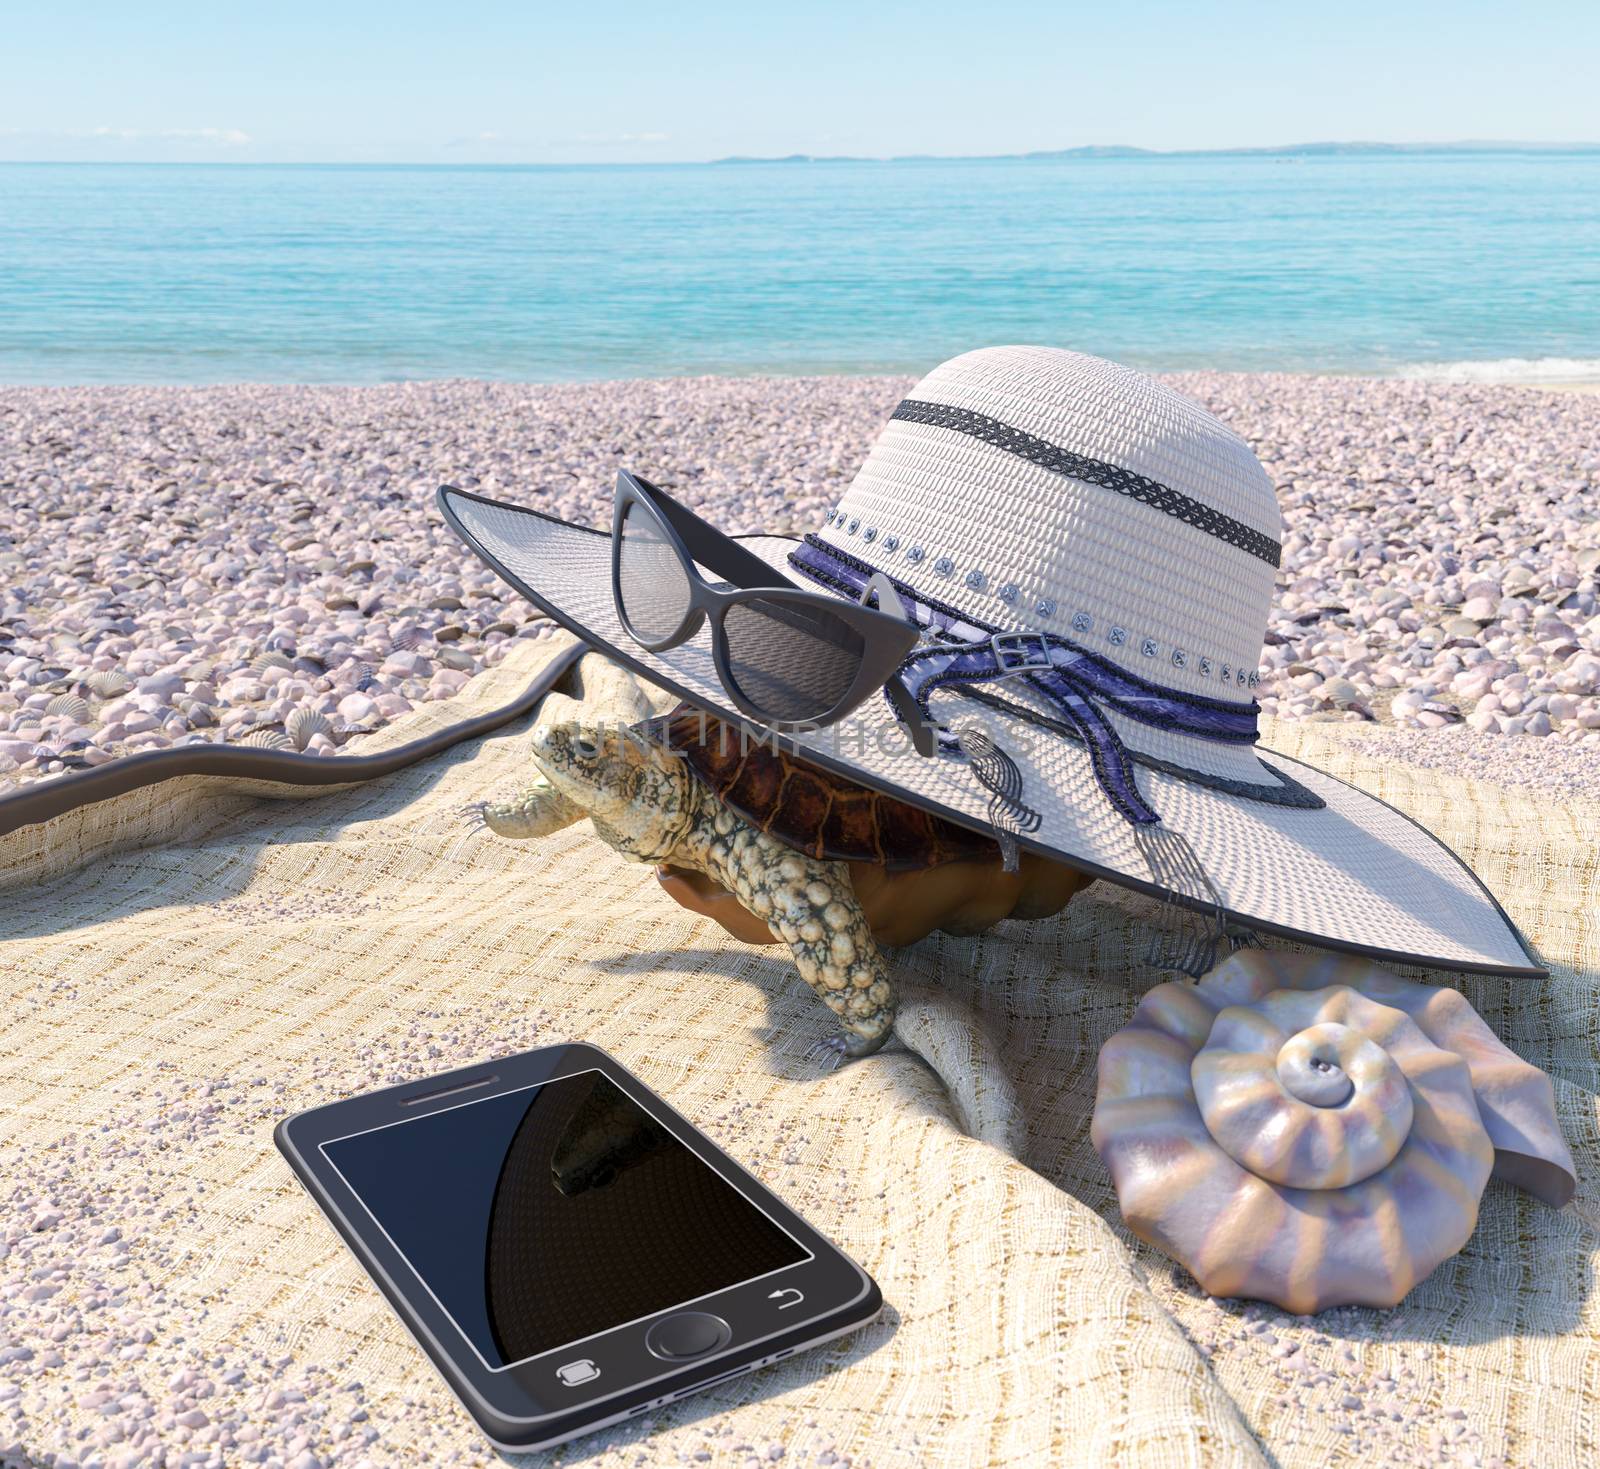 relaxing vacation concept background with seashell, turtle and beach accessories